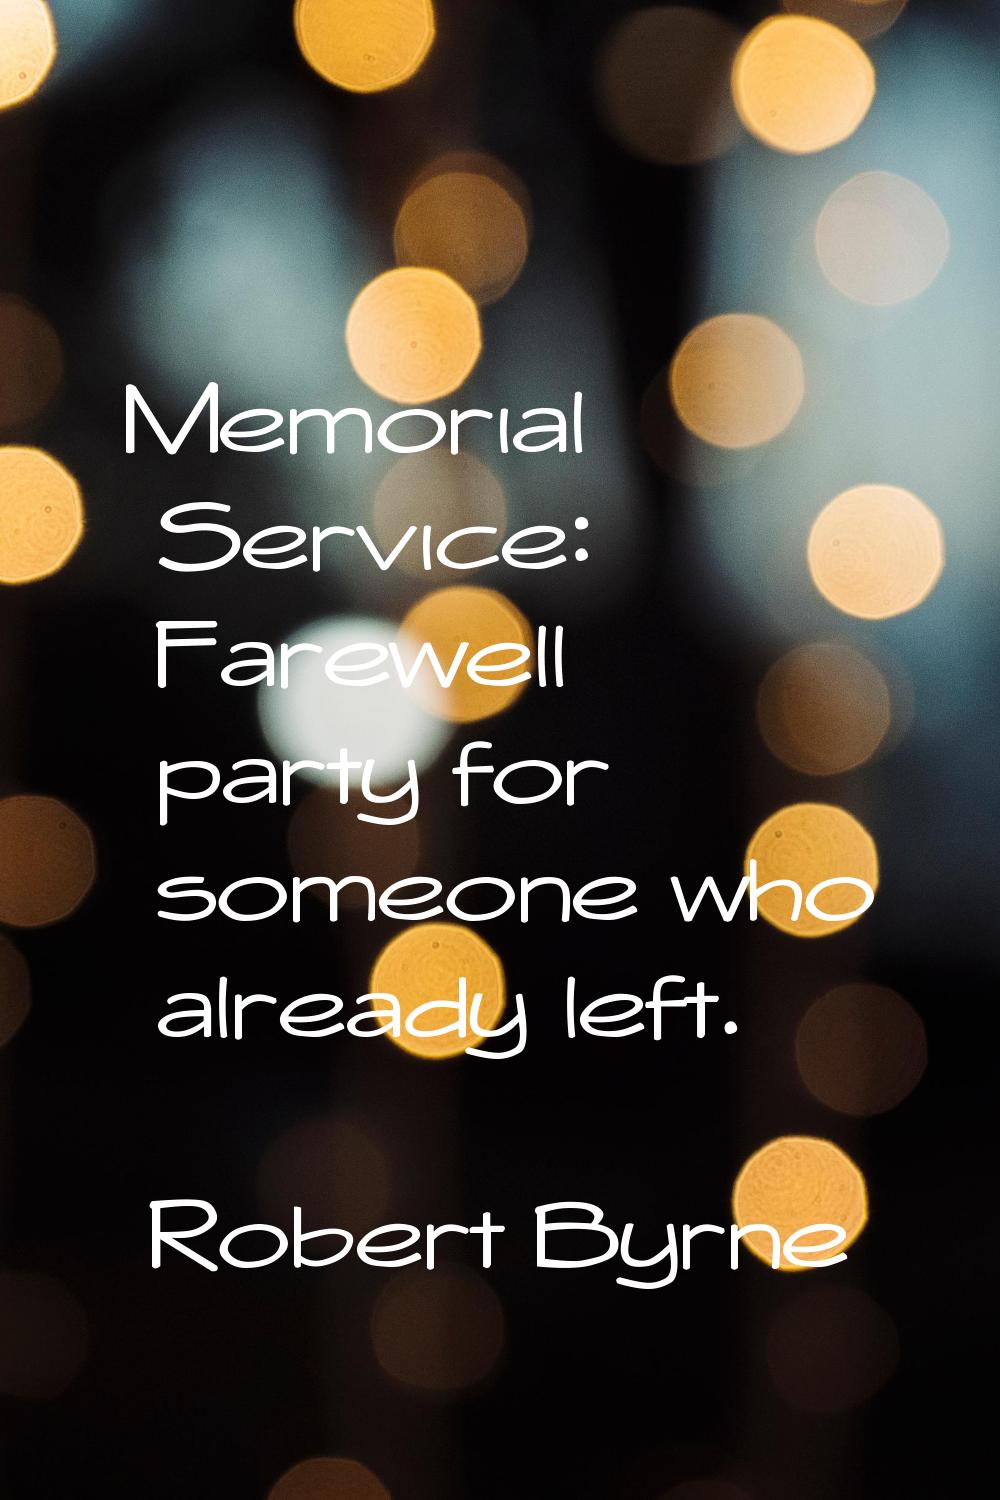 Memorial Service: Farewell party for someone who already left.